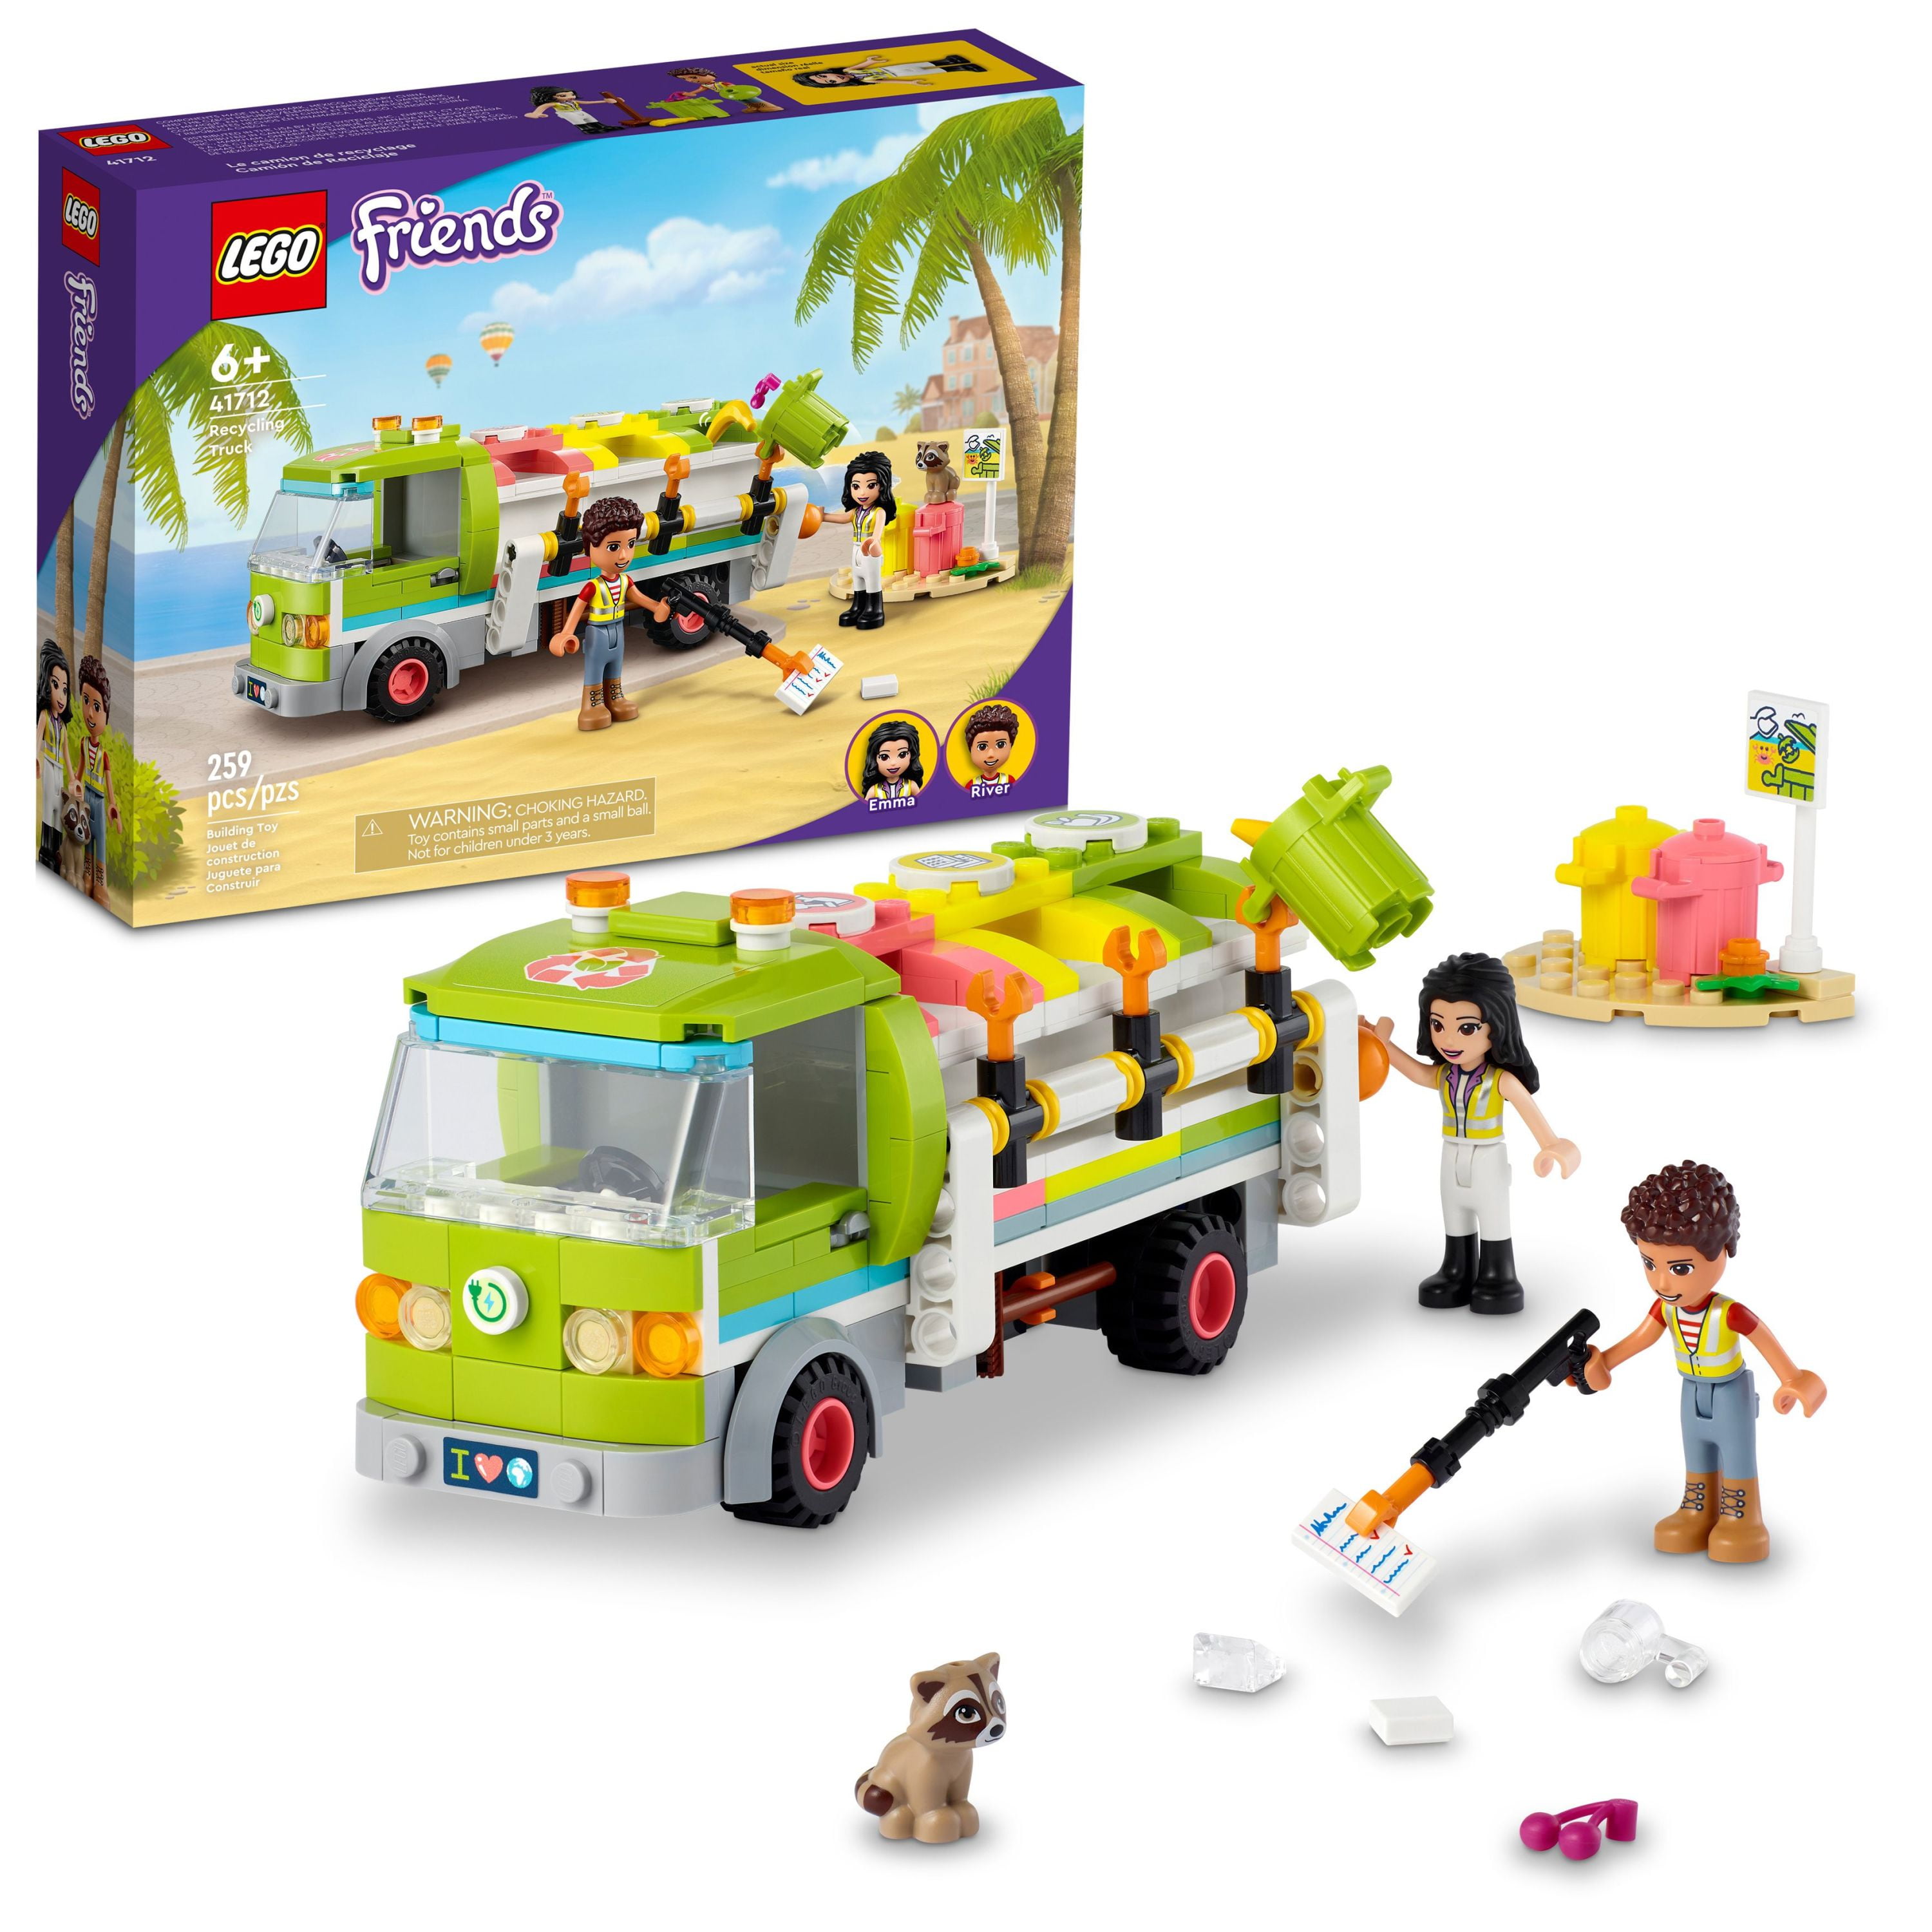 LEGO Friends Recycling Truck Toy 41712 with Garbage Sorting Bins plus Emma and River Mini Dolls, Educational Toys for Kids 6 Plus Years Old